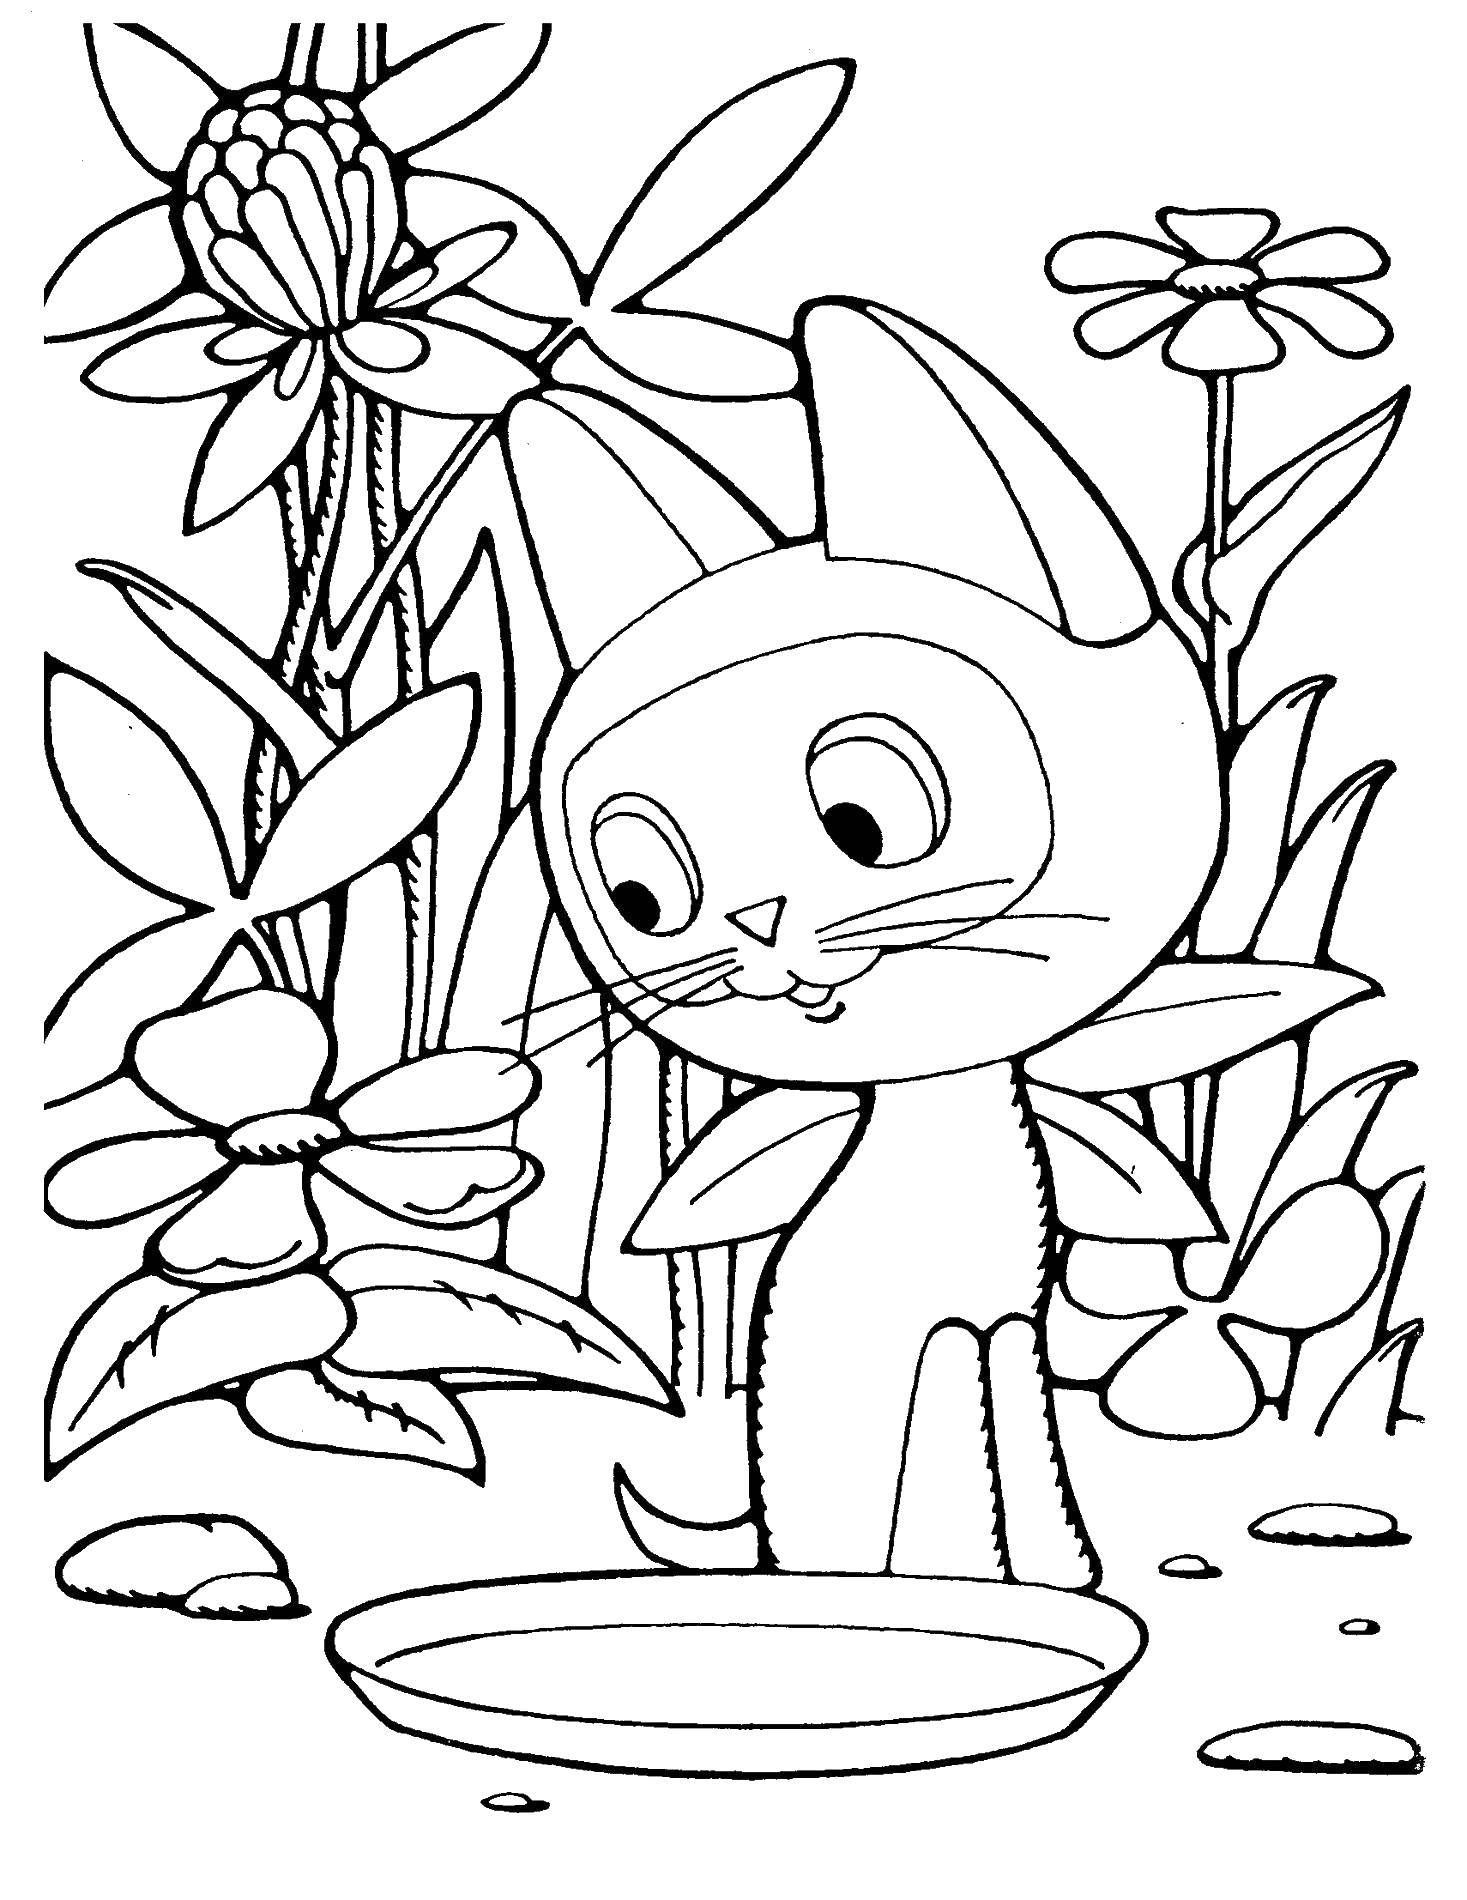 Coloring Kitten named woof. Category cartoons. Tags:  cat, cat.